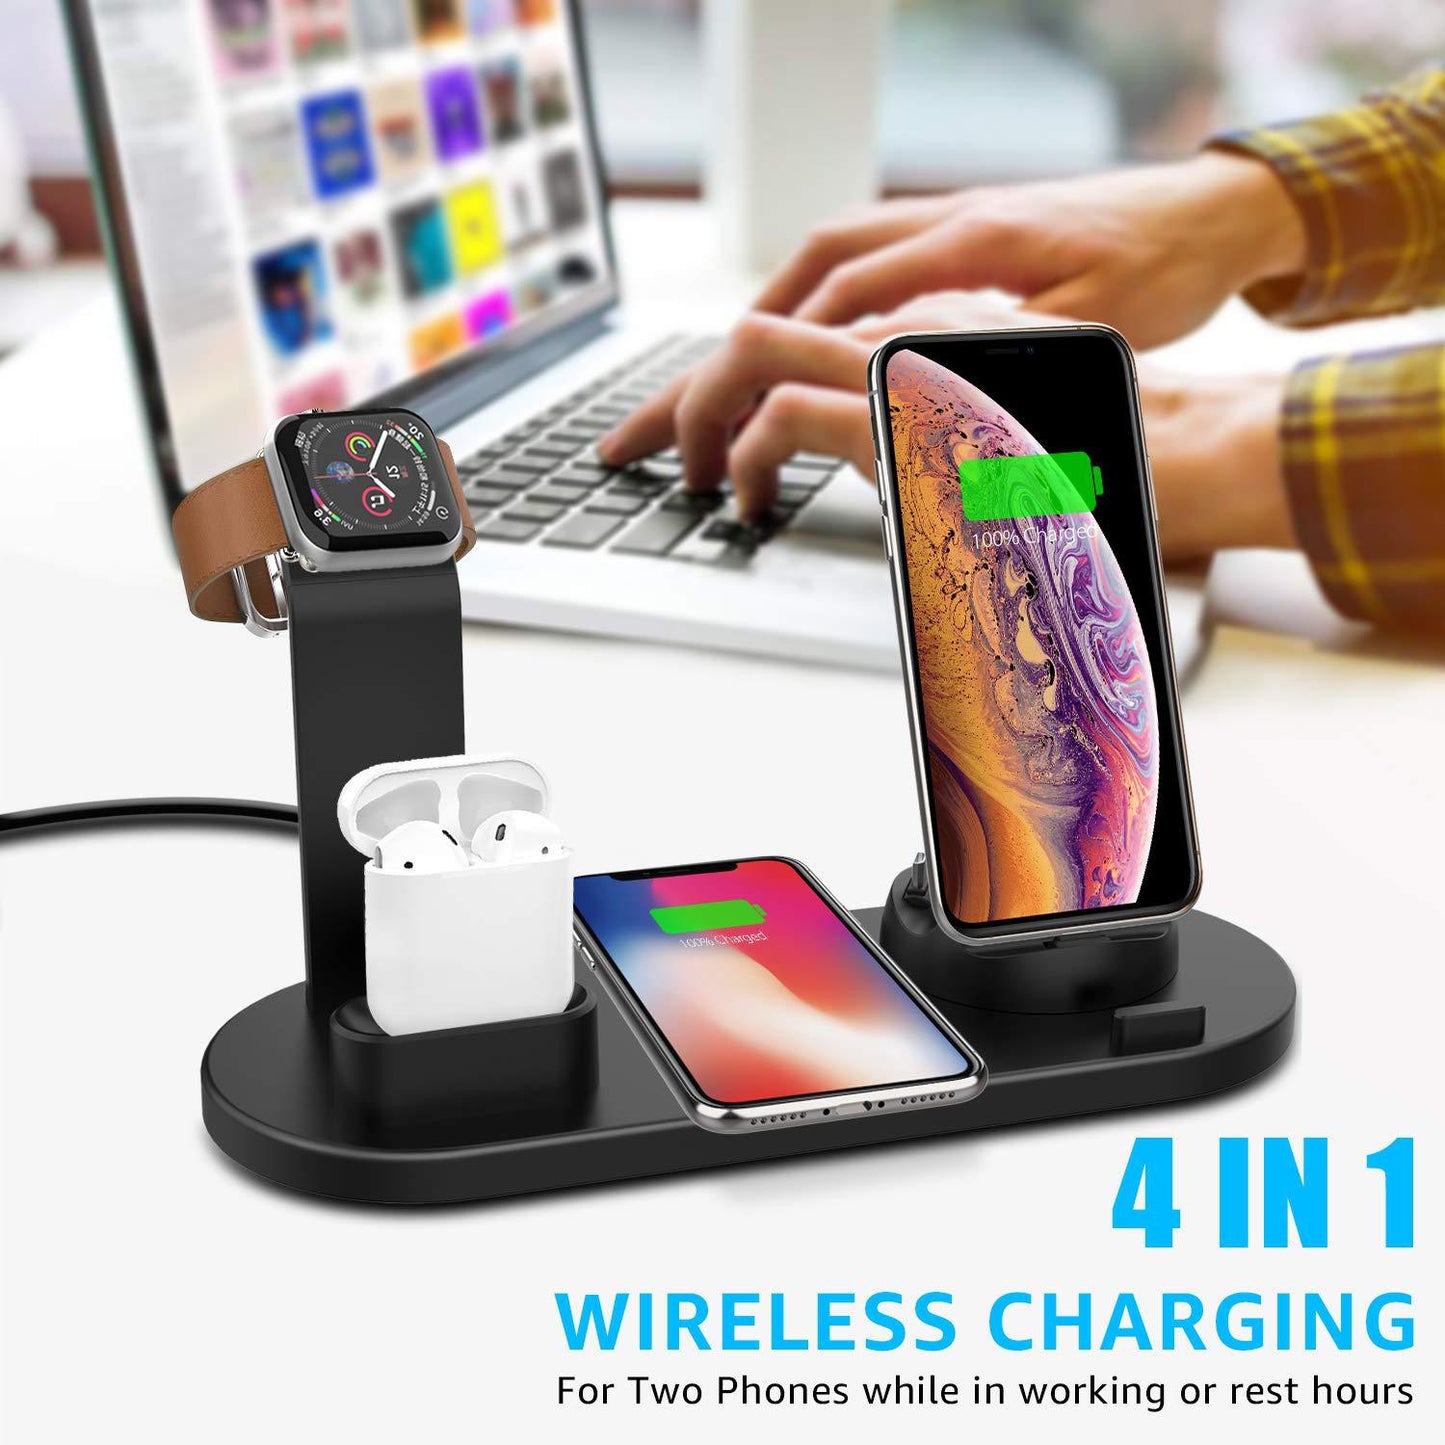 Compatible with Apple, Suitable For Iphone 4 In 1 Wireless Charging Stand